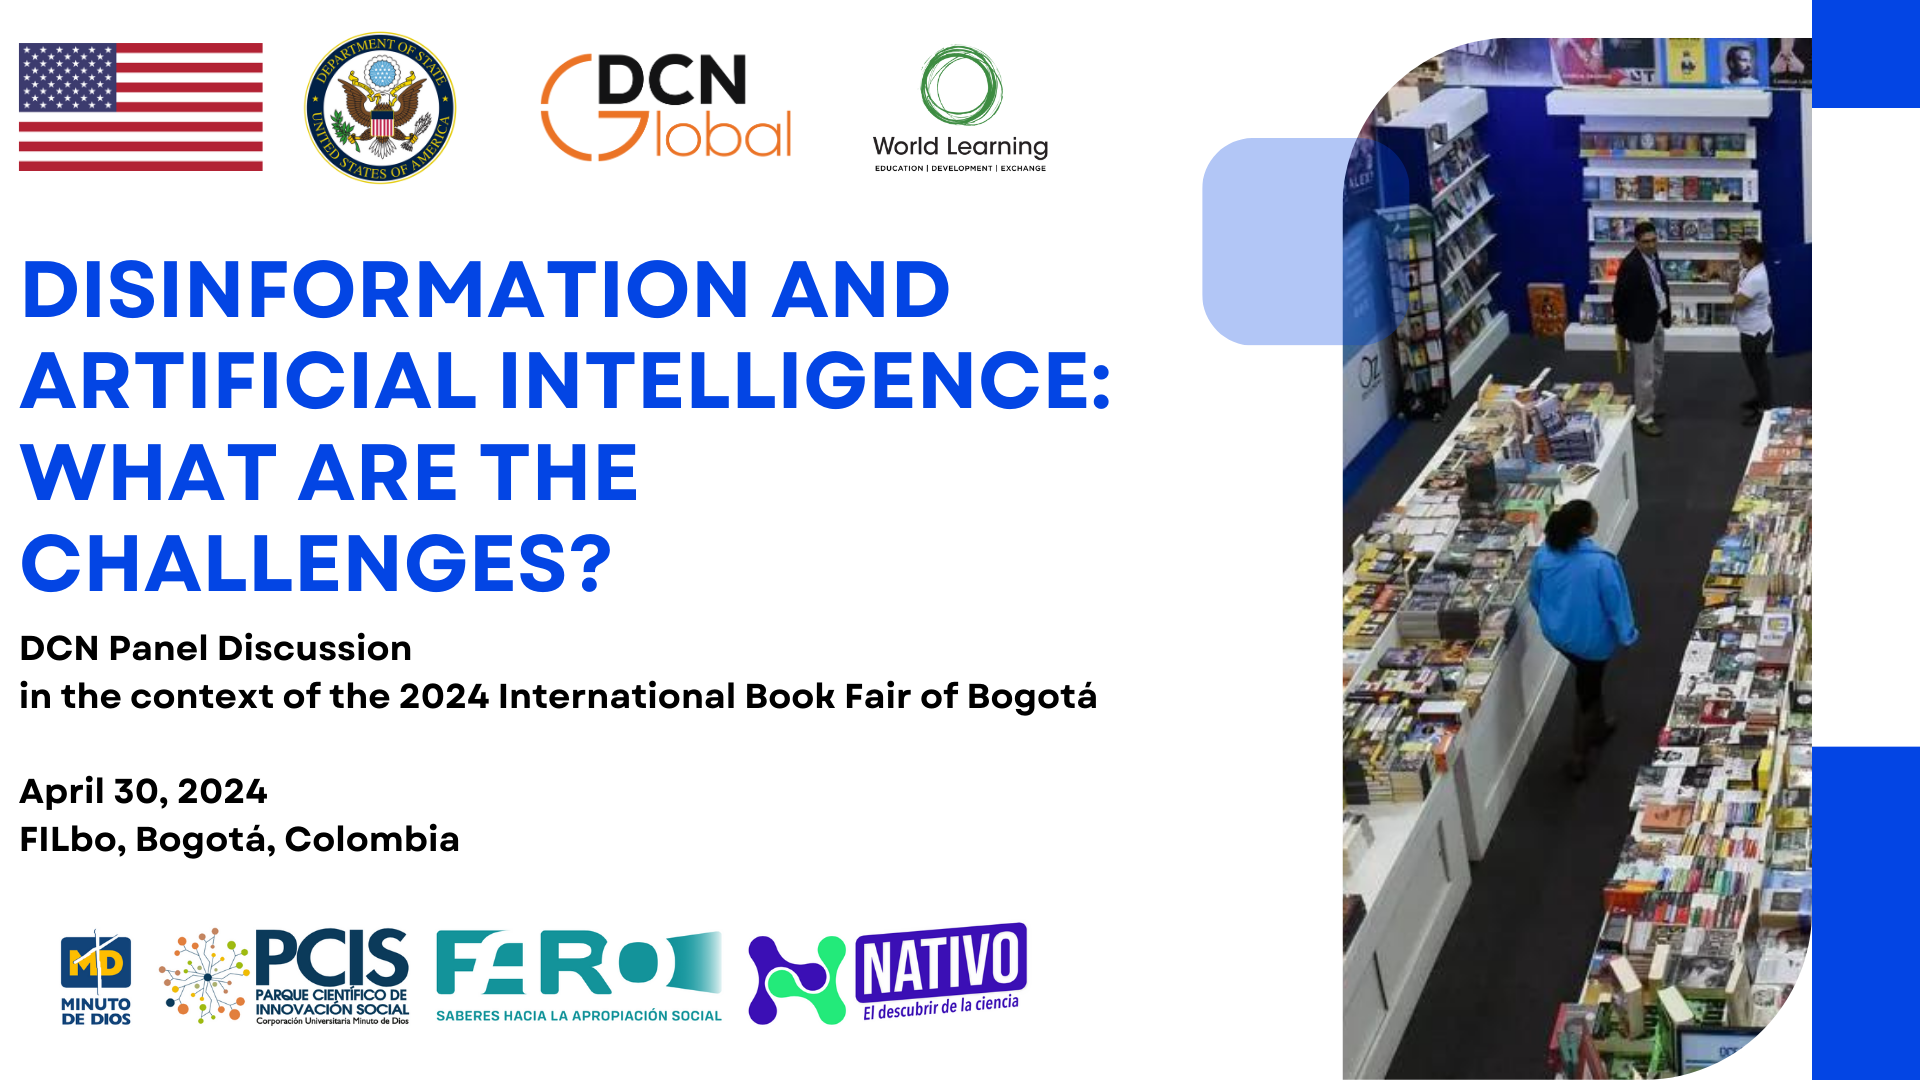 Disinformation and artificial intelligence: What are the challenges?